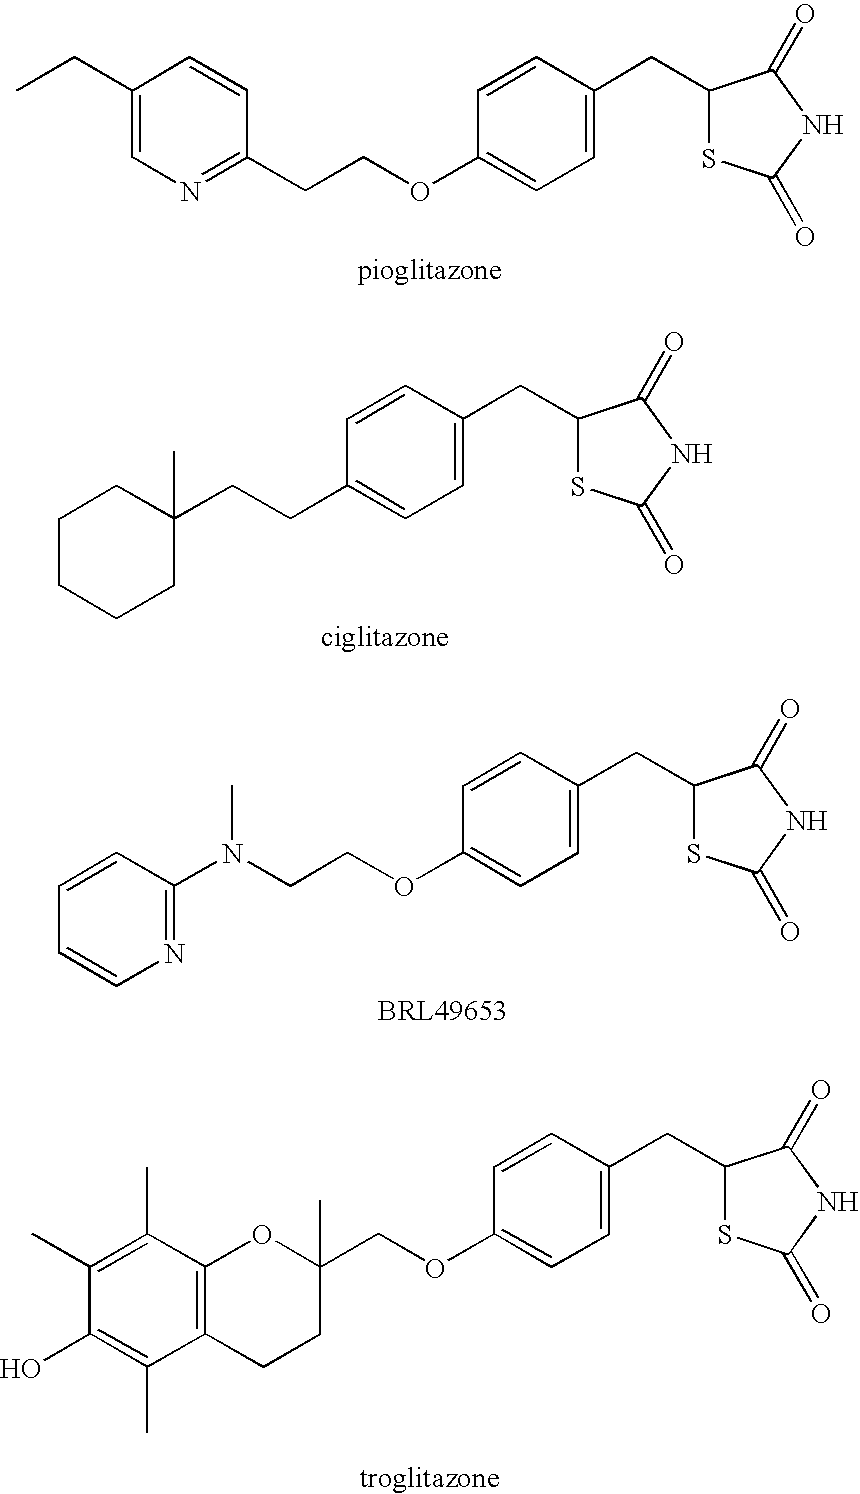 Carboxylic acid derivative and a pharmaceutical composition containing the derivative as active ingredient